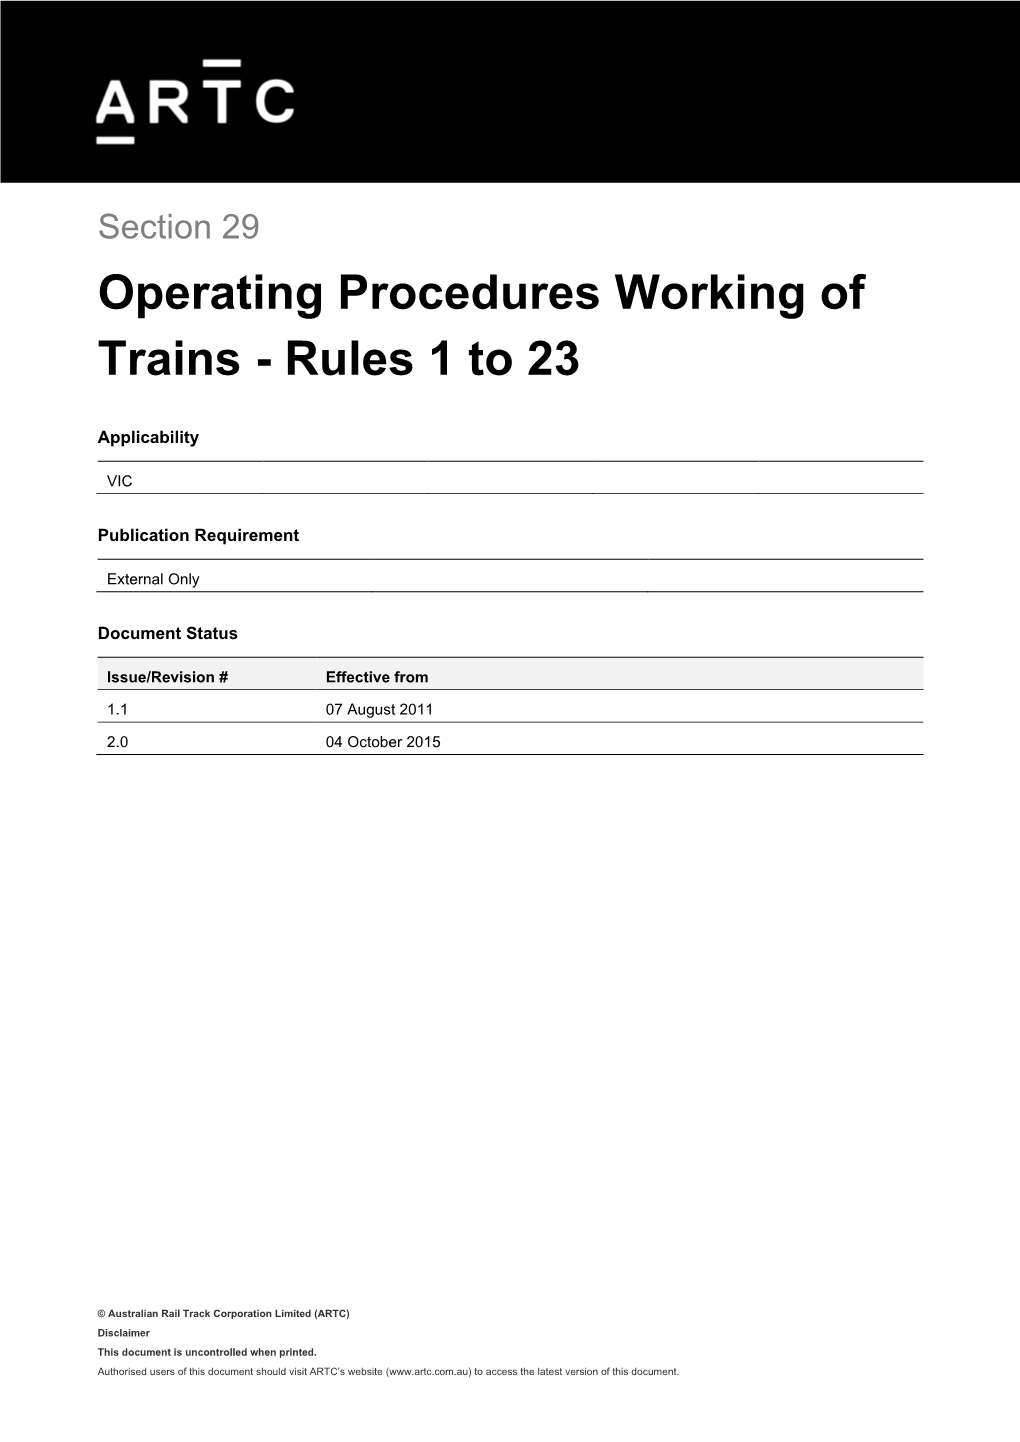 TA20 Section 29 Working of Trains